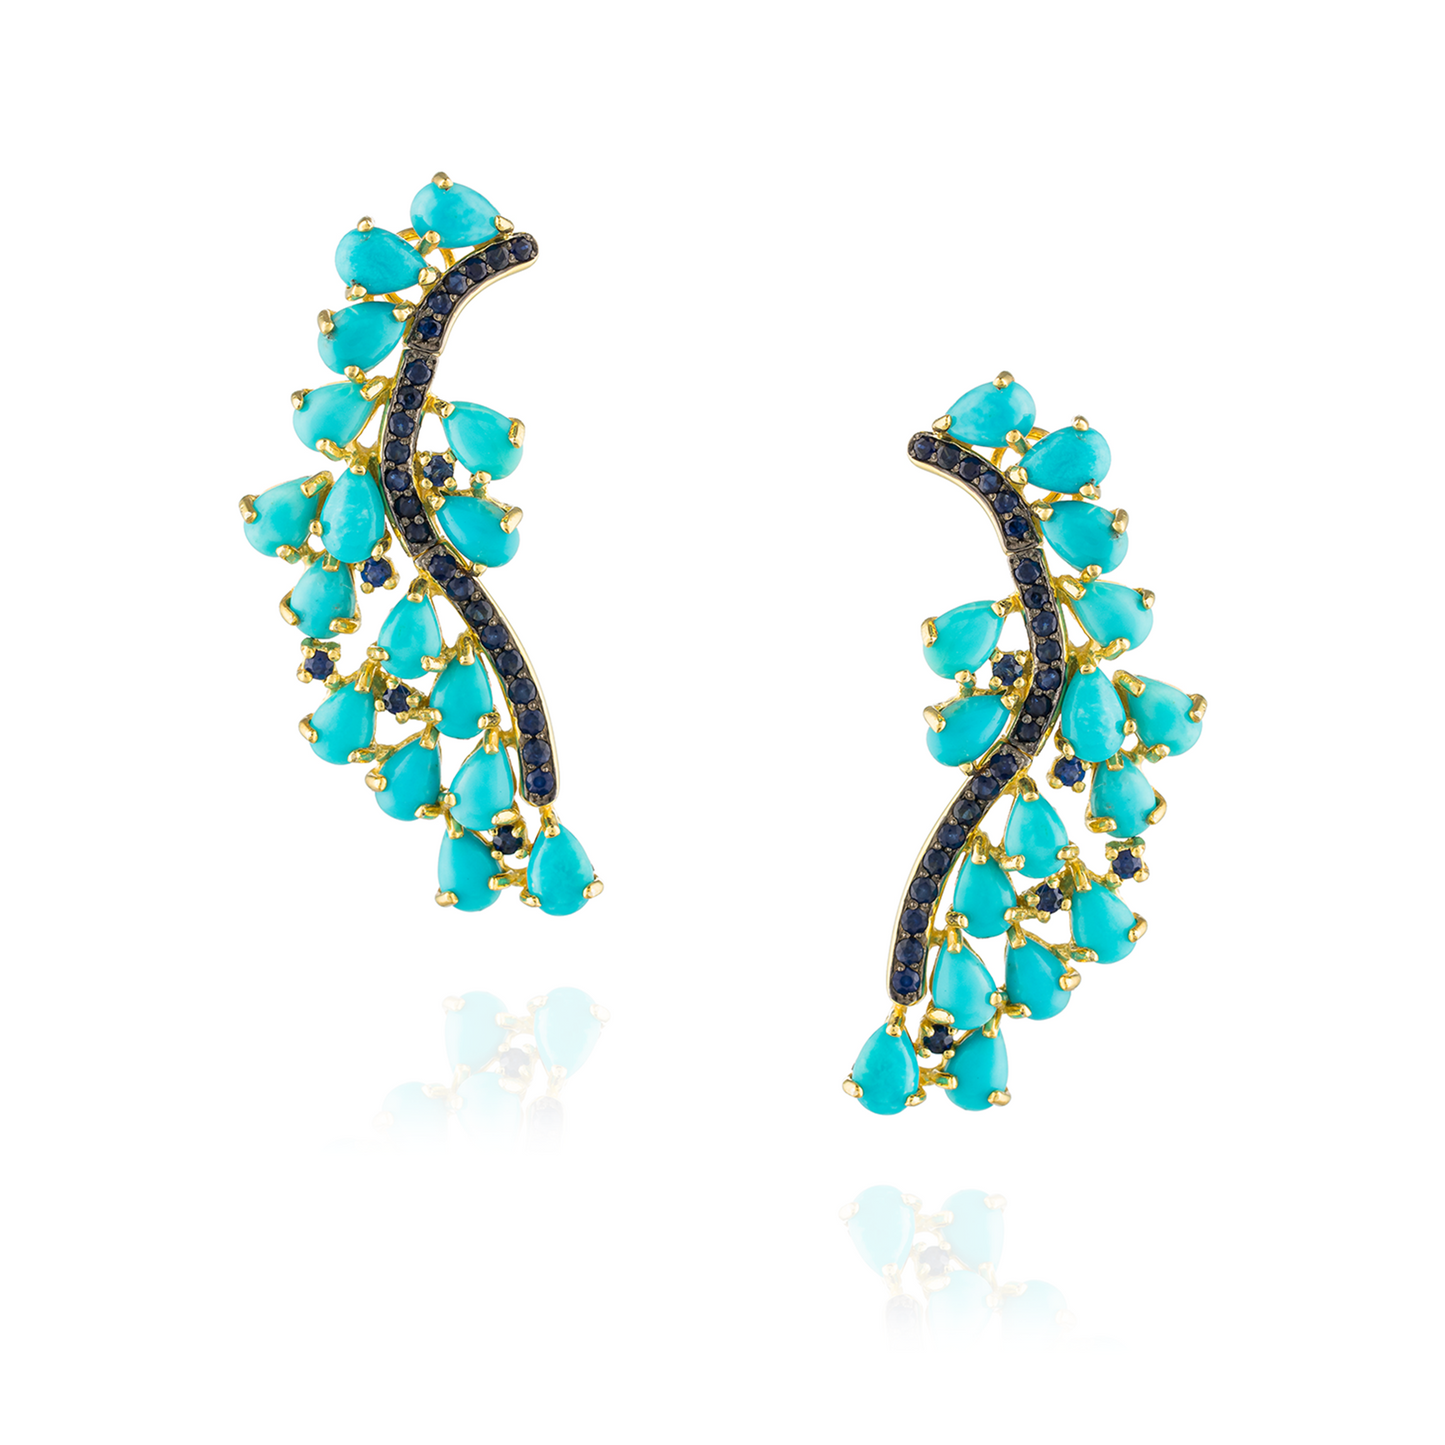 Load image into Gallery viewer, 925 Silver Earrings Yellow Gold Plated with Turquoise Cabouchon and Blue Sapphires
